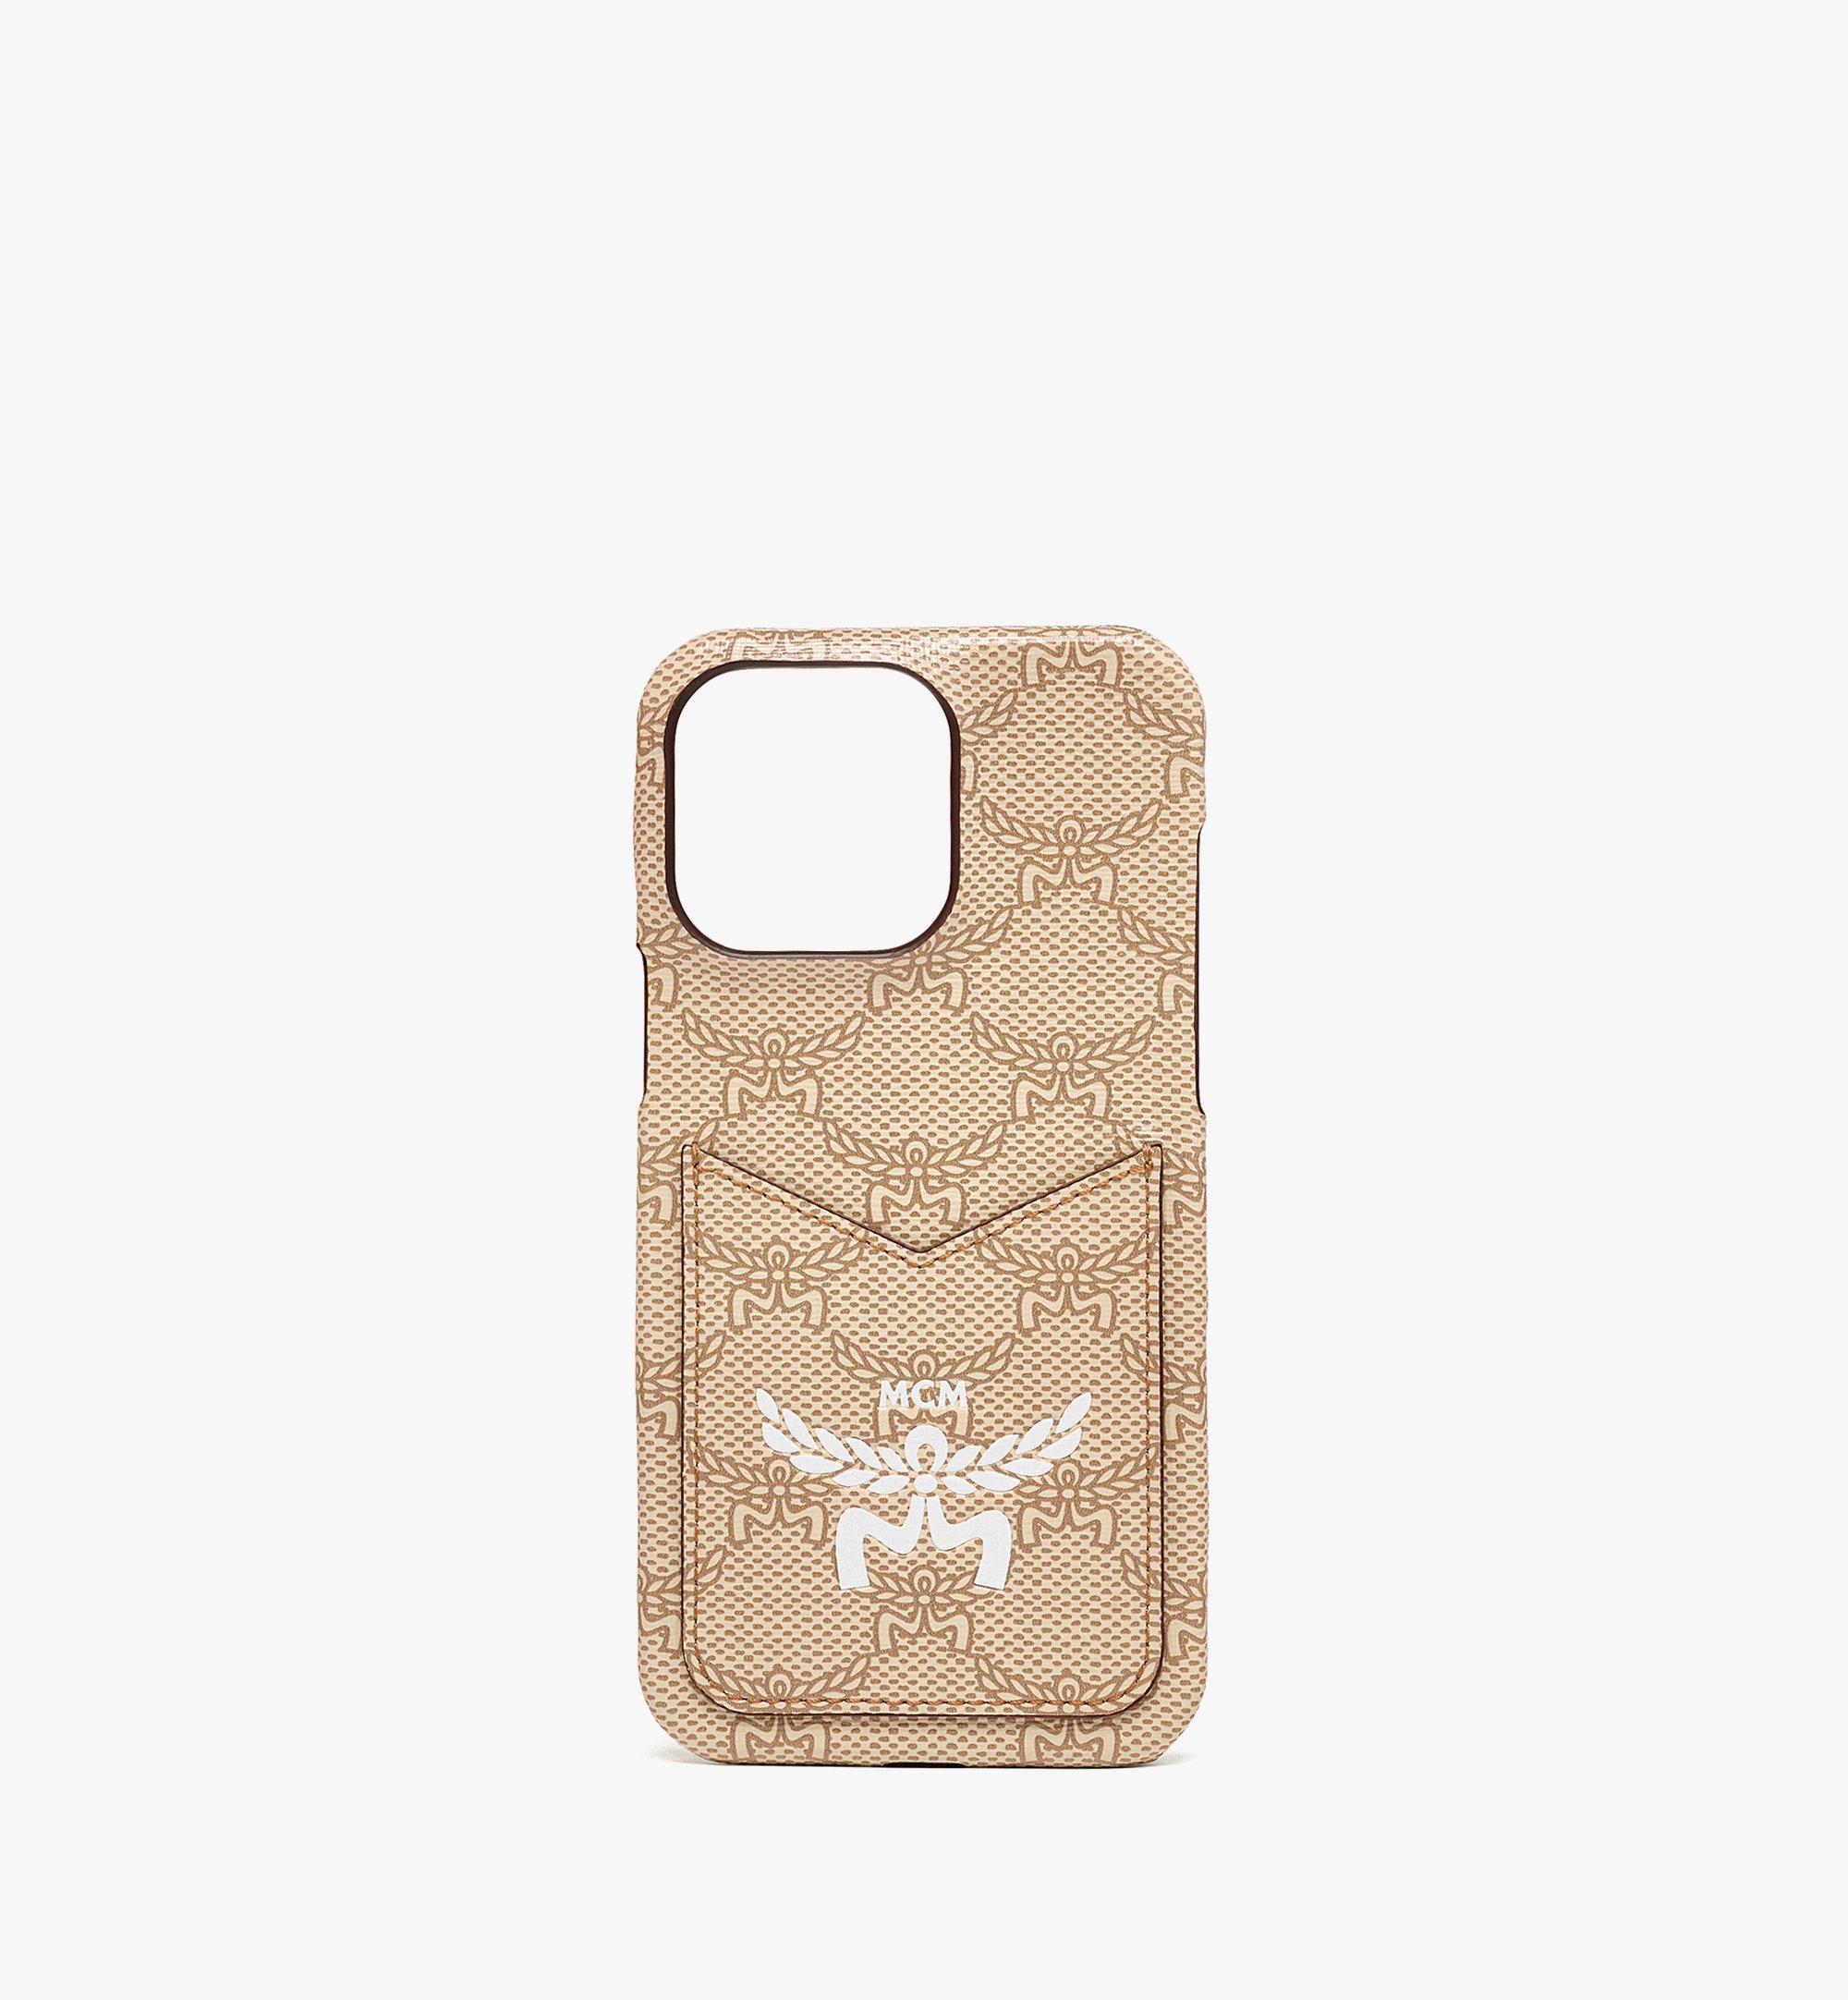 Women's Leather Phone Cases & Tech Accessories | MCM® US